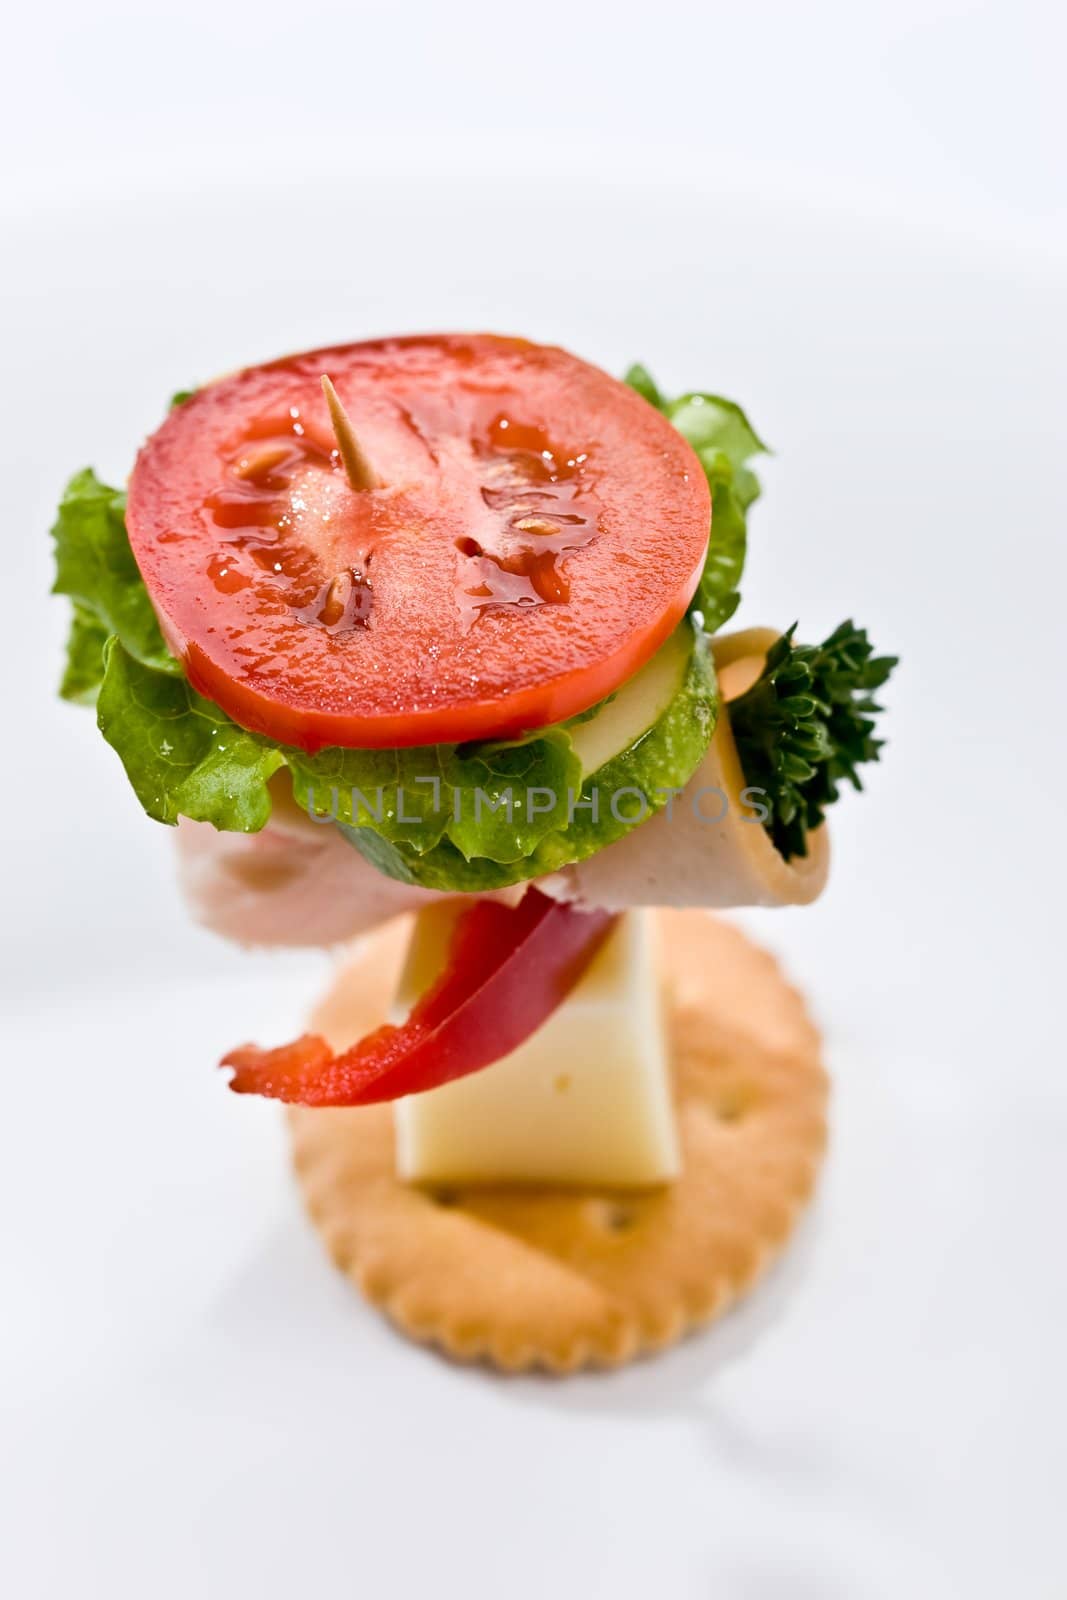 food theme: cracker with ham, cheese and vegetables on the plate